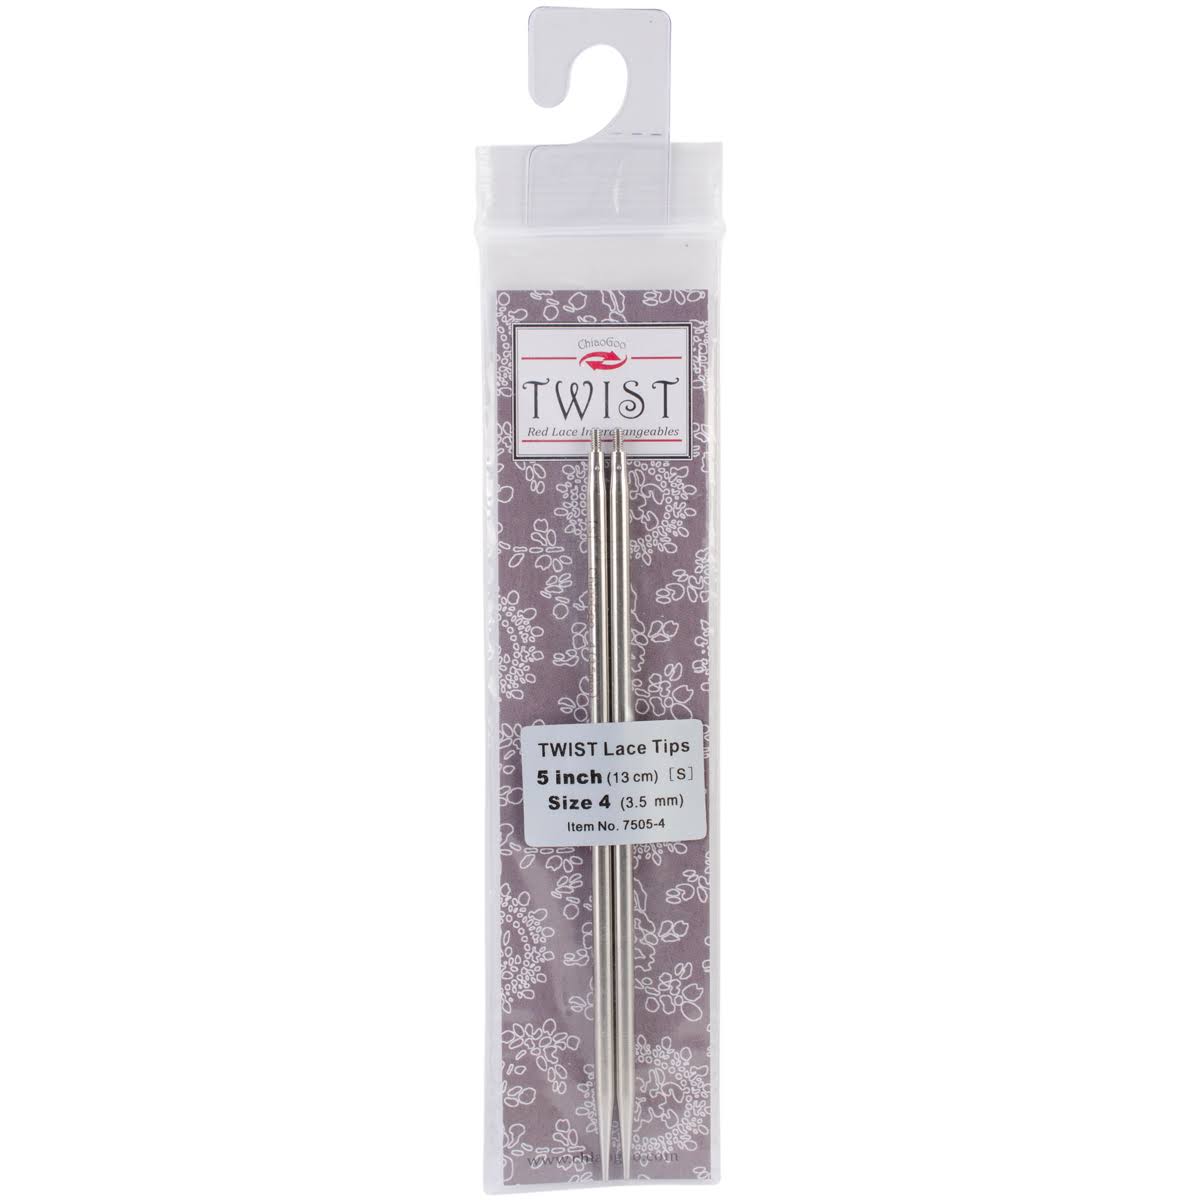 Twist Red Lace Interchangeable Tips - Size 4 3.5mm, 5"